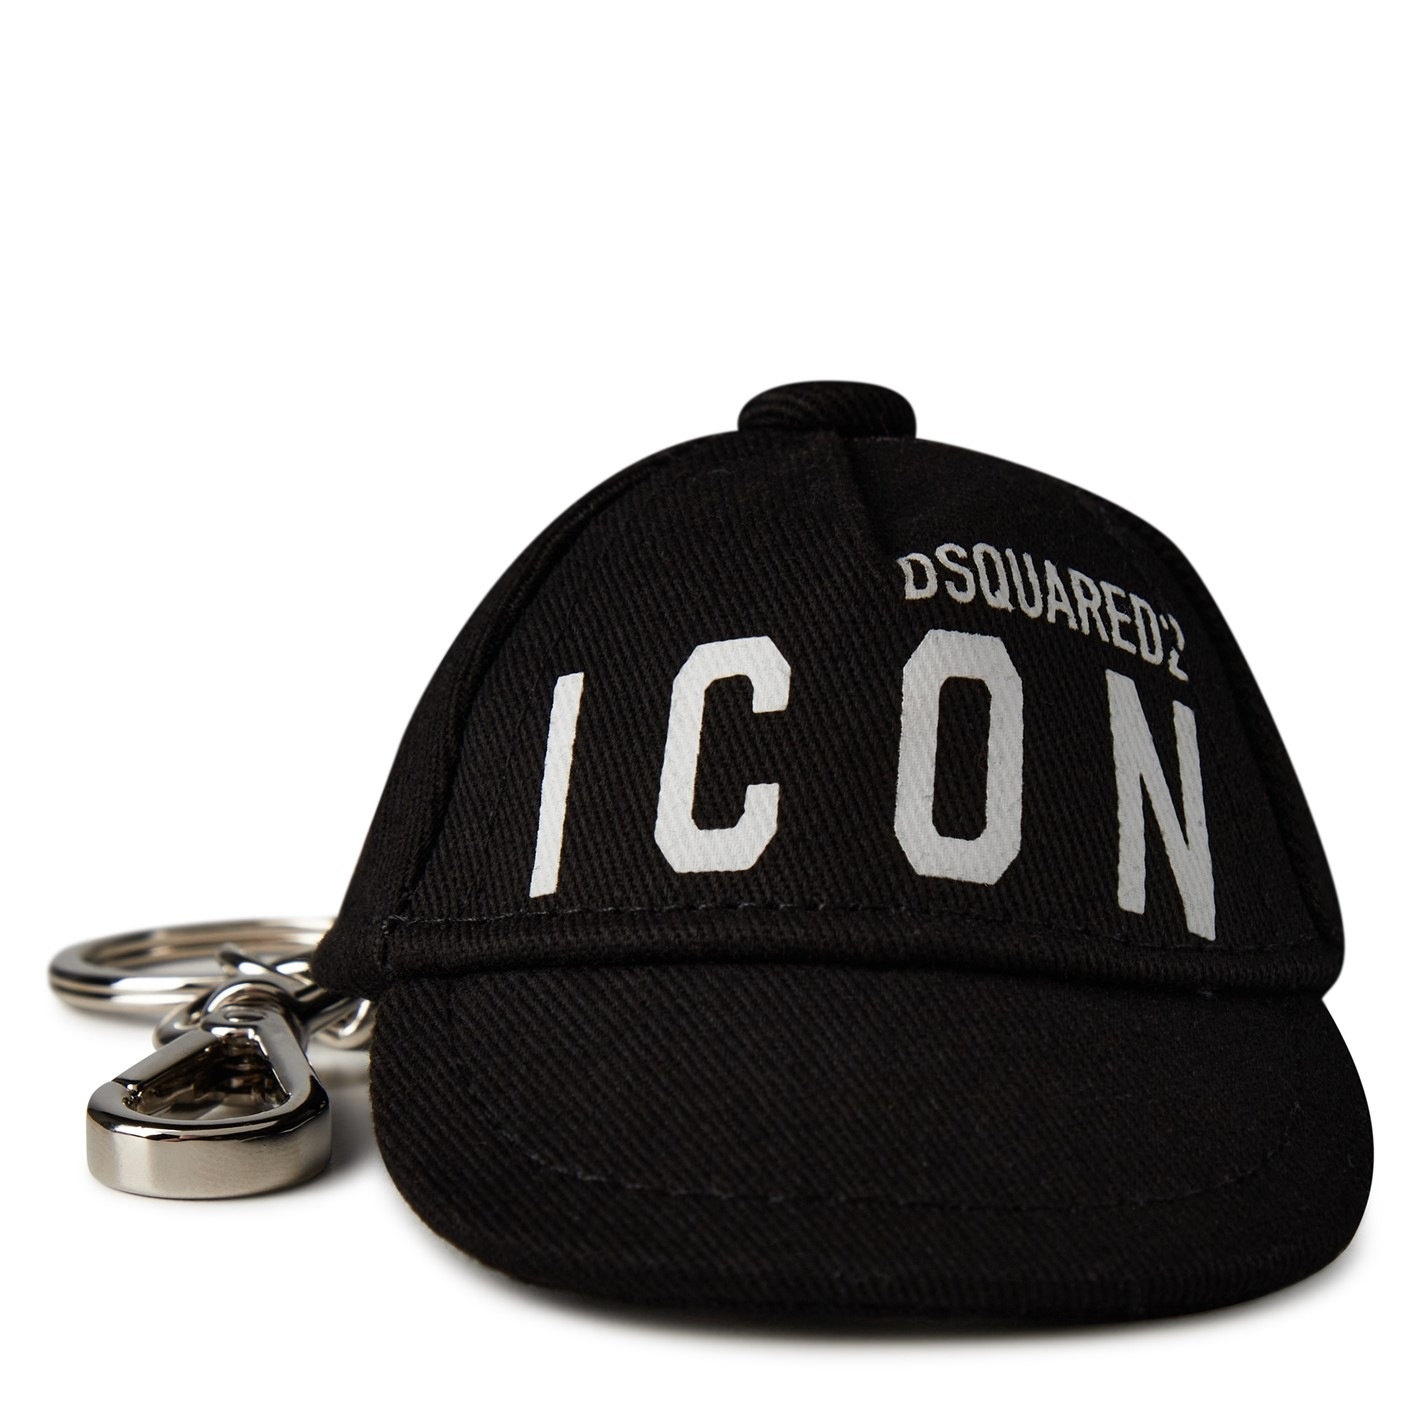 Be Icon Pant Chain